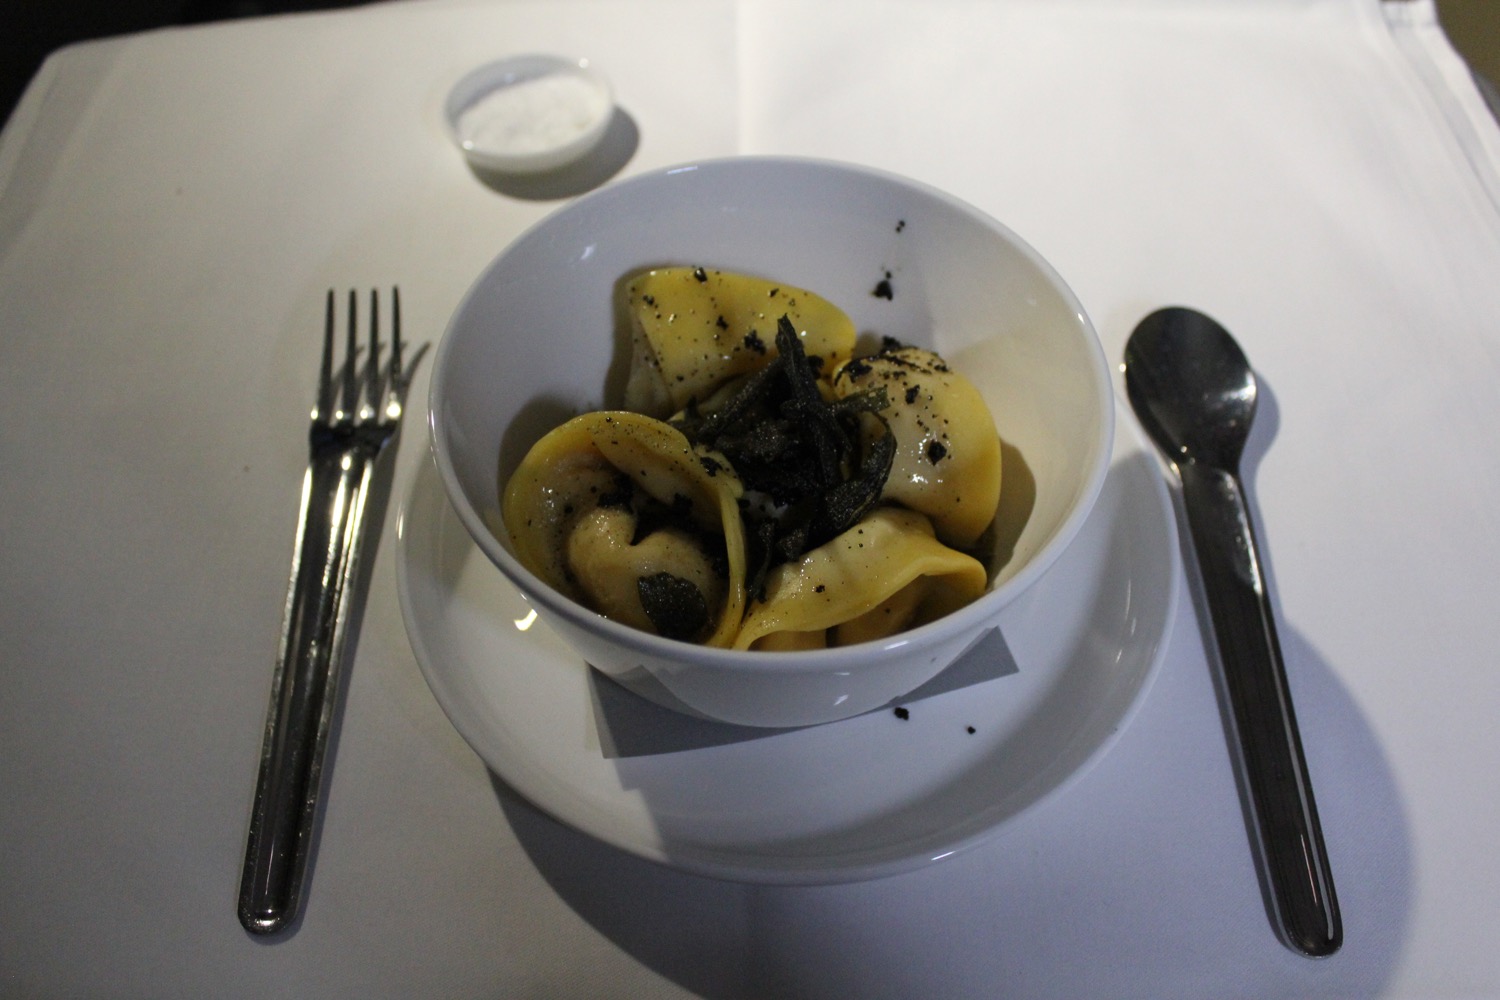 a bowl of pasta with black specks on top and a spoon